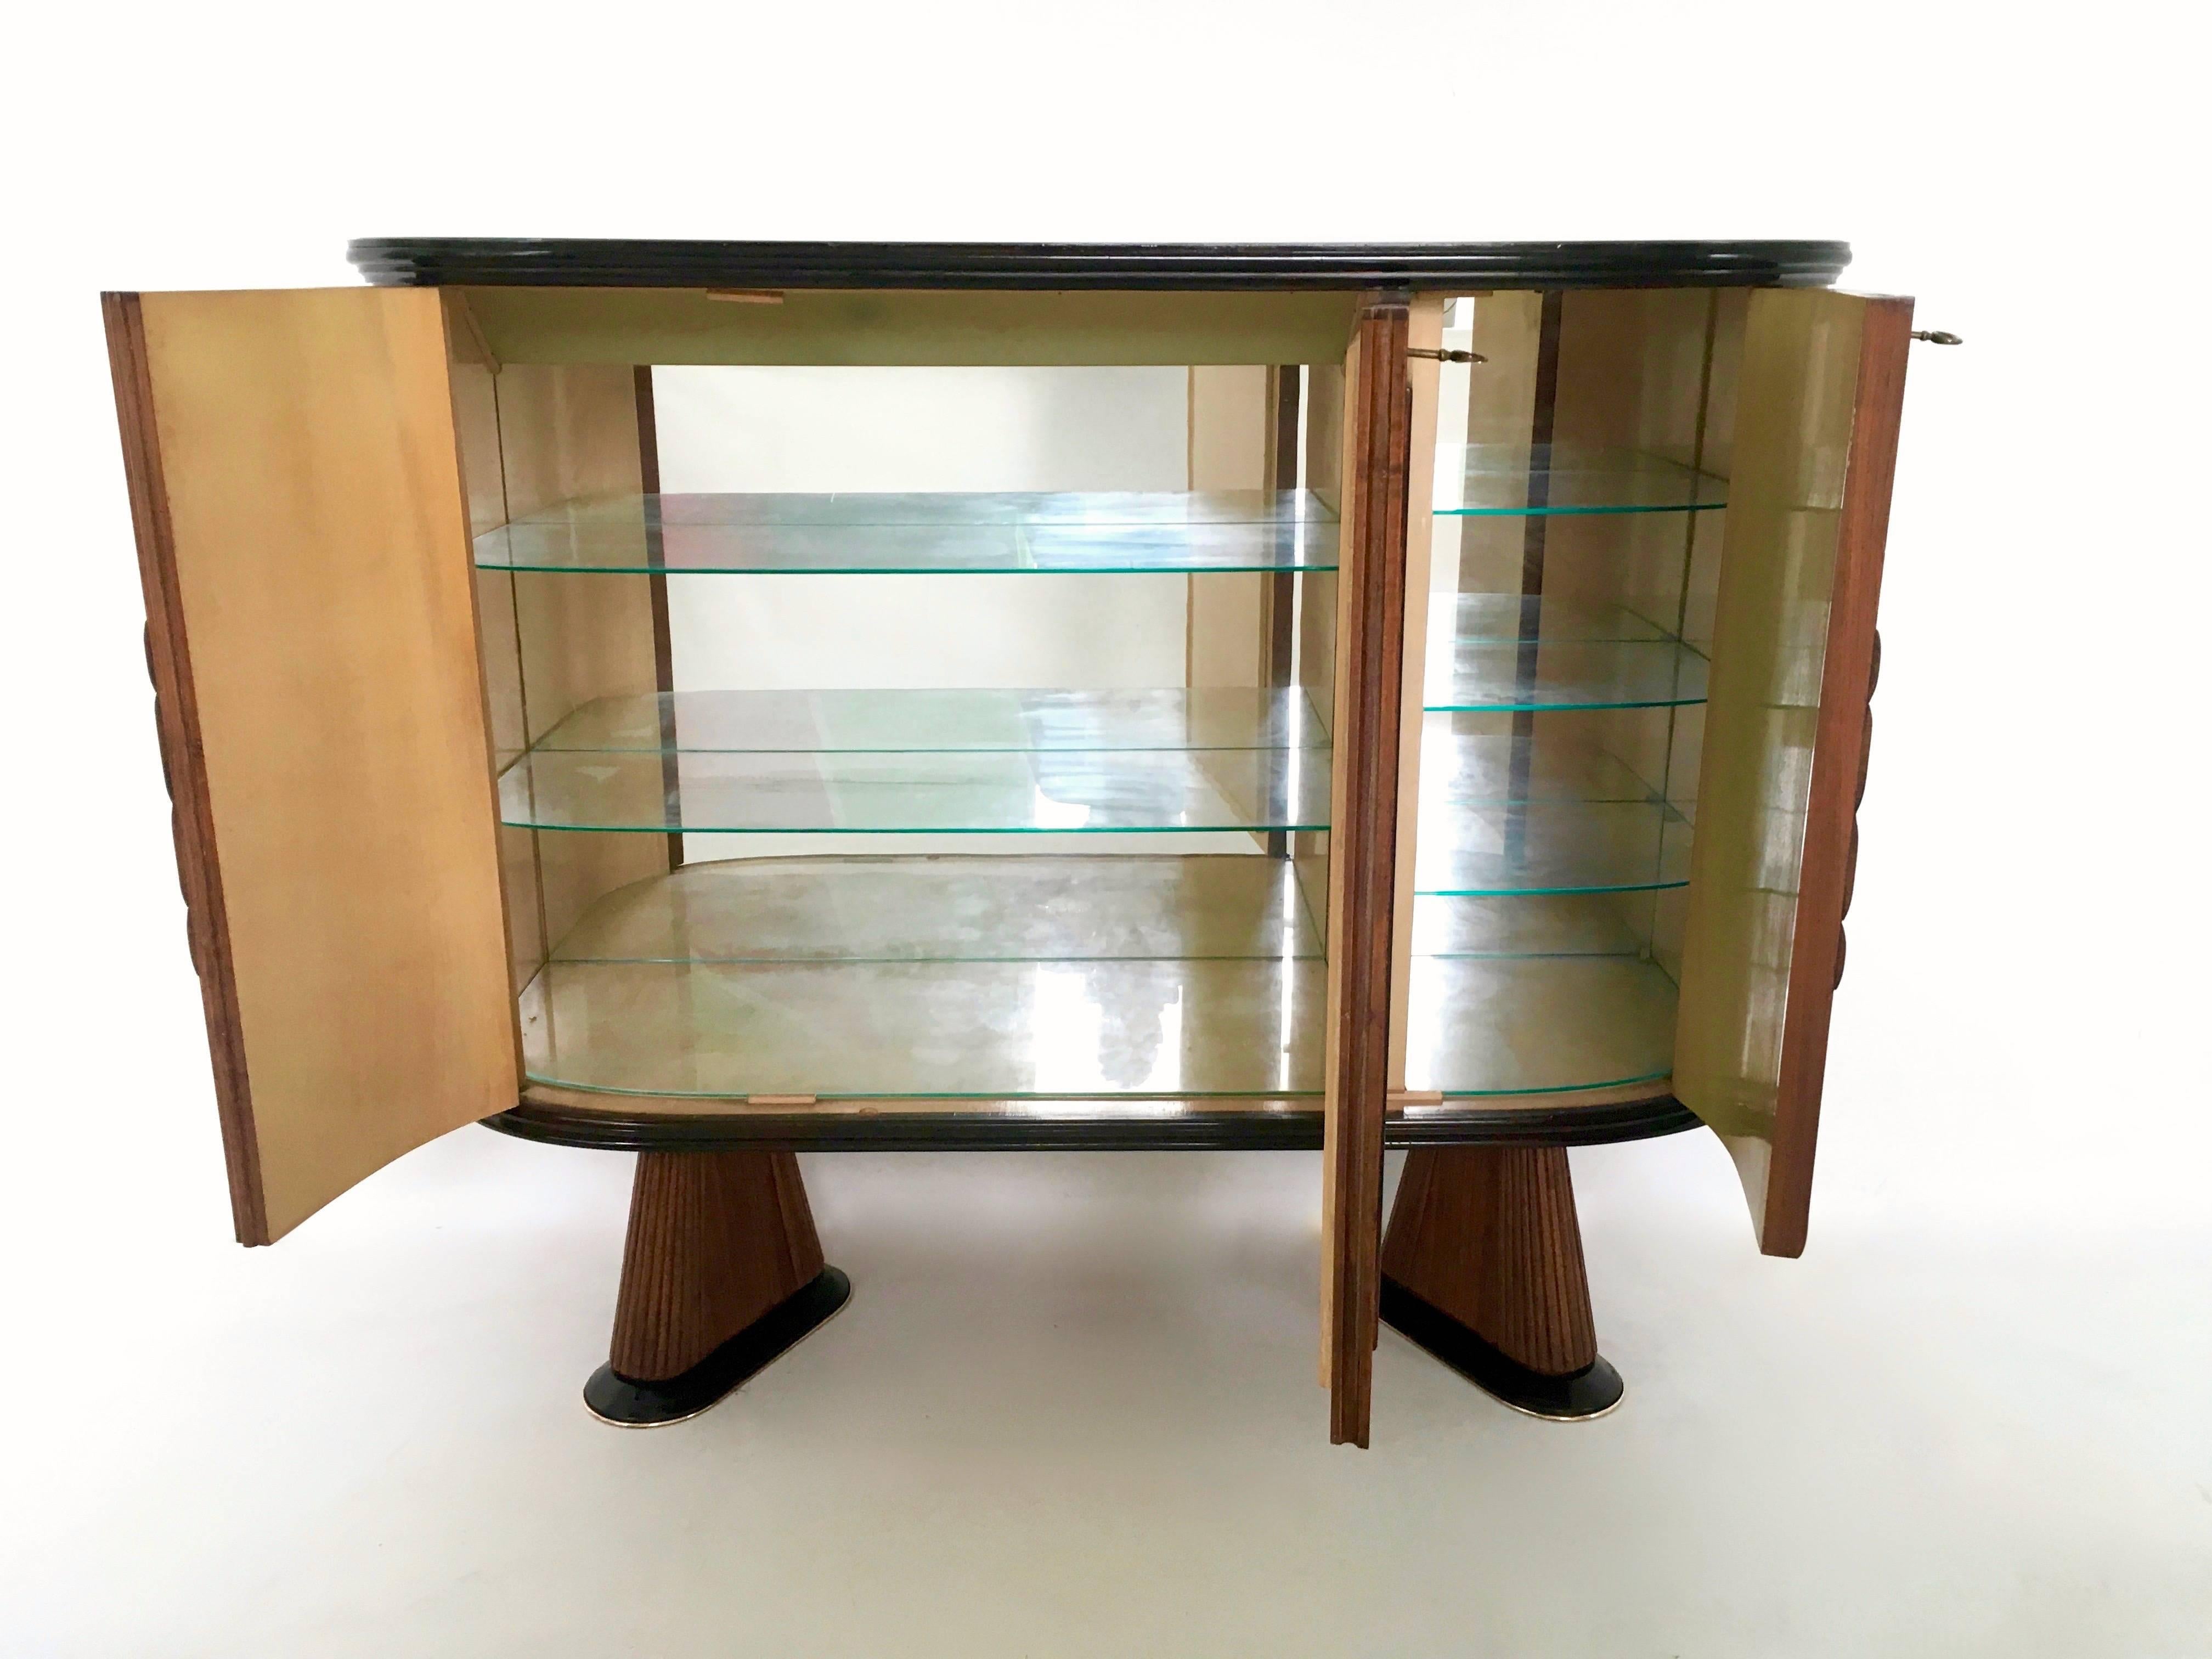 Made in wood, blue mirror, glass and brass. The interiors are made from maple and mirrors. 
In excellent condition.